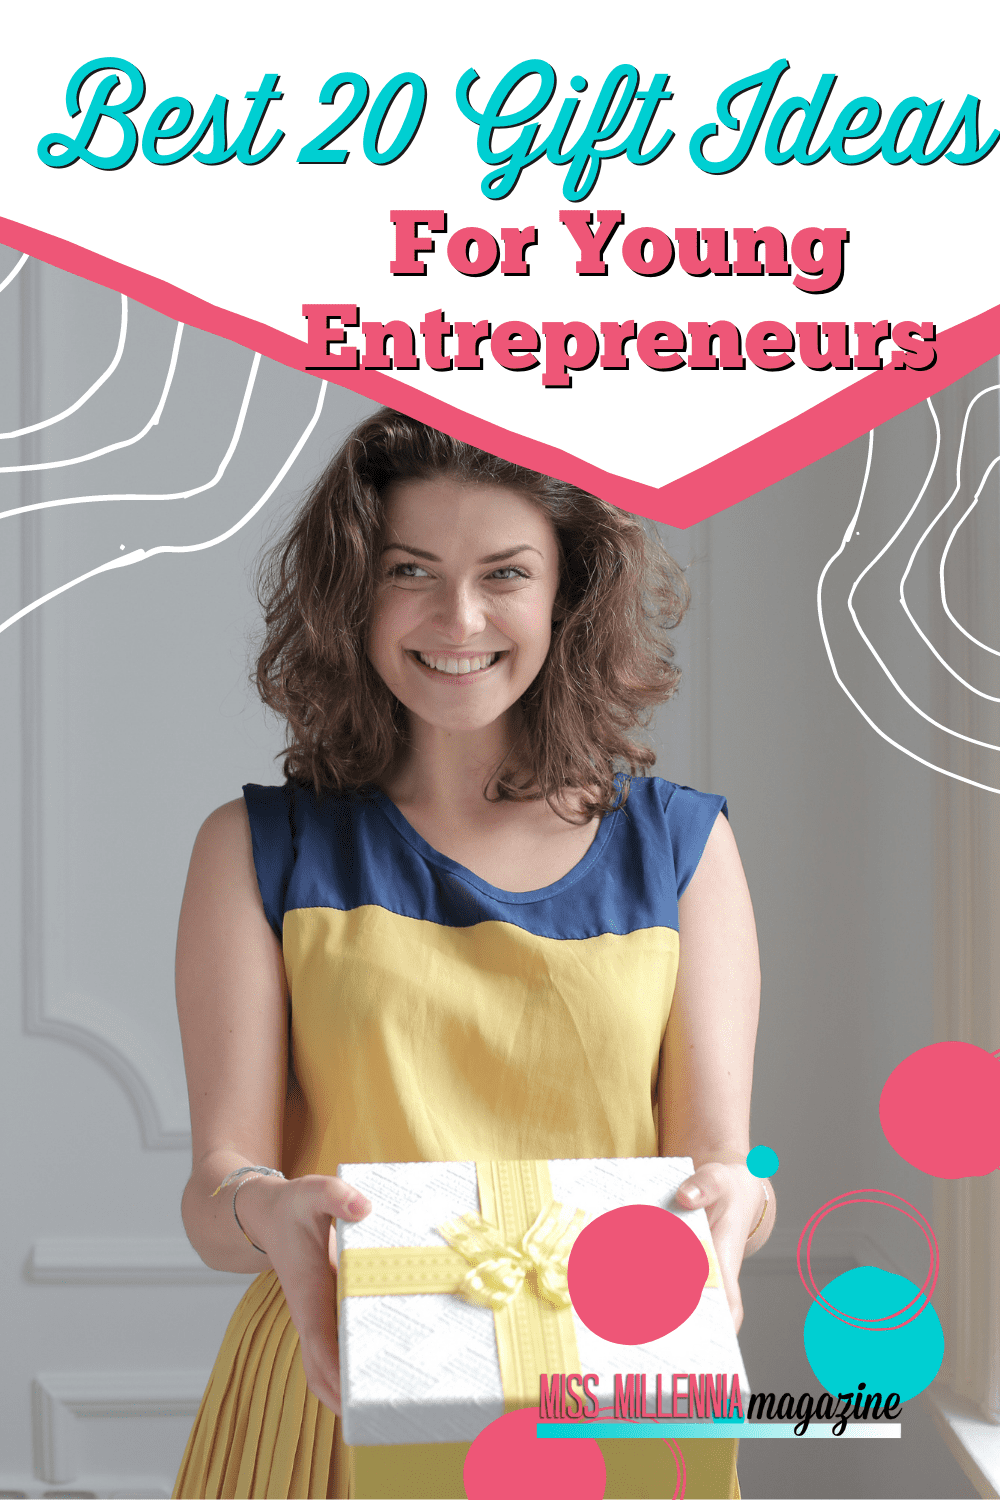 Best 20 Gift Ideas For Young Entrepreneurs